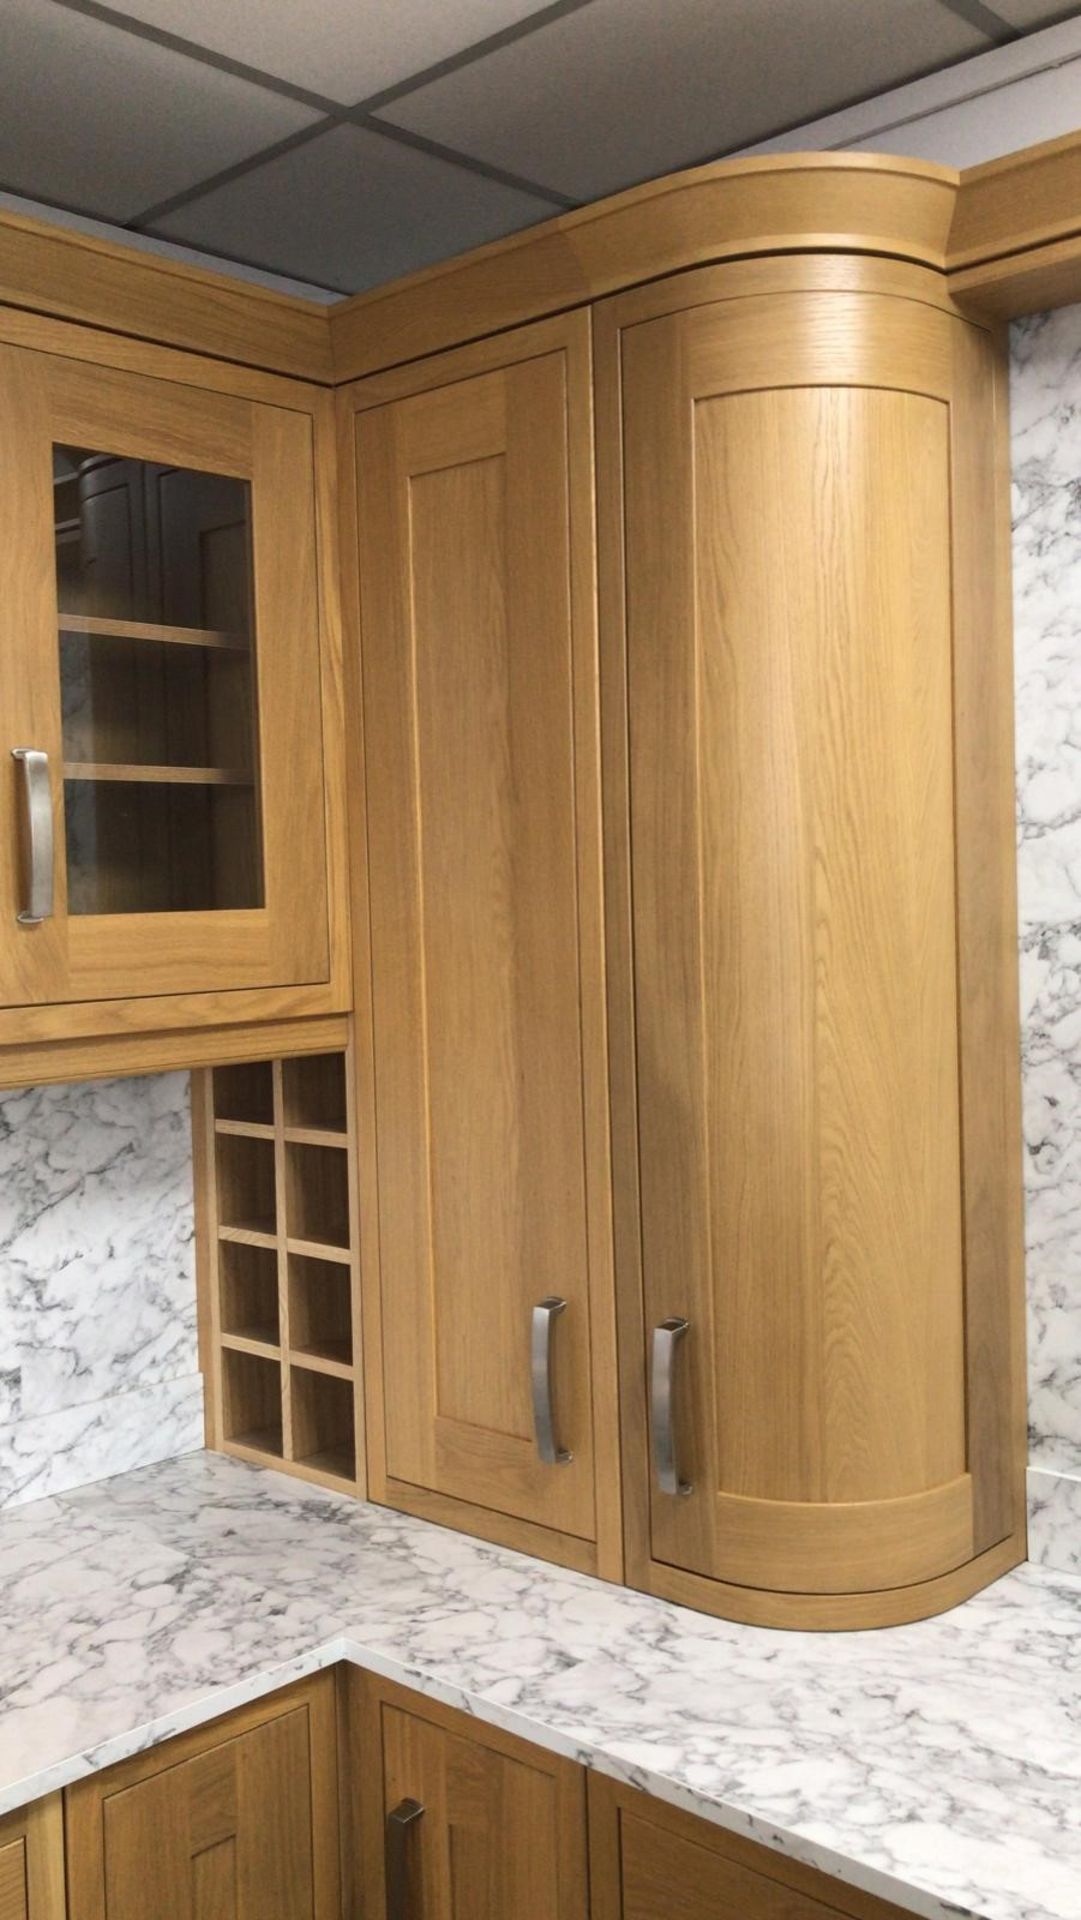 Circa 5000+ items Solid oak inframe kitchen doors inc over 100 curved doors etc, circa 87 pallets (2 - Image 6 of 15